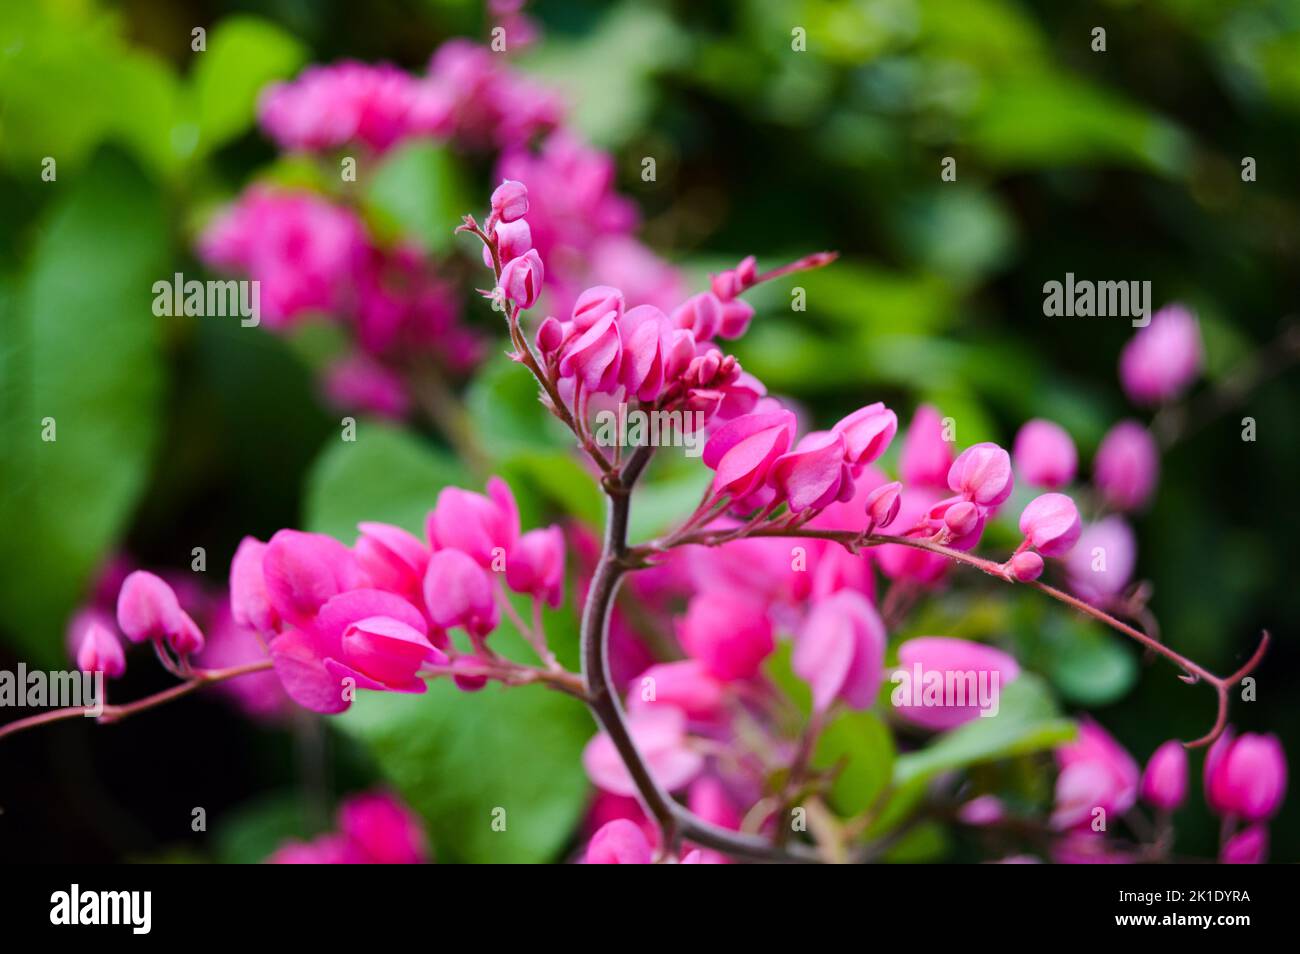 Antigonon leptopus commonly known as coral vine or Mexican creeper or queen's wreath. With blured background, light bokeh background. Stock Photo